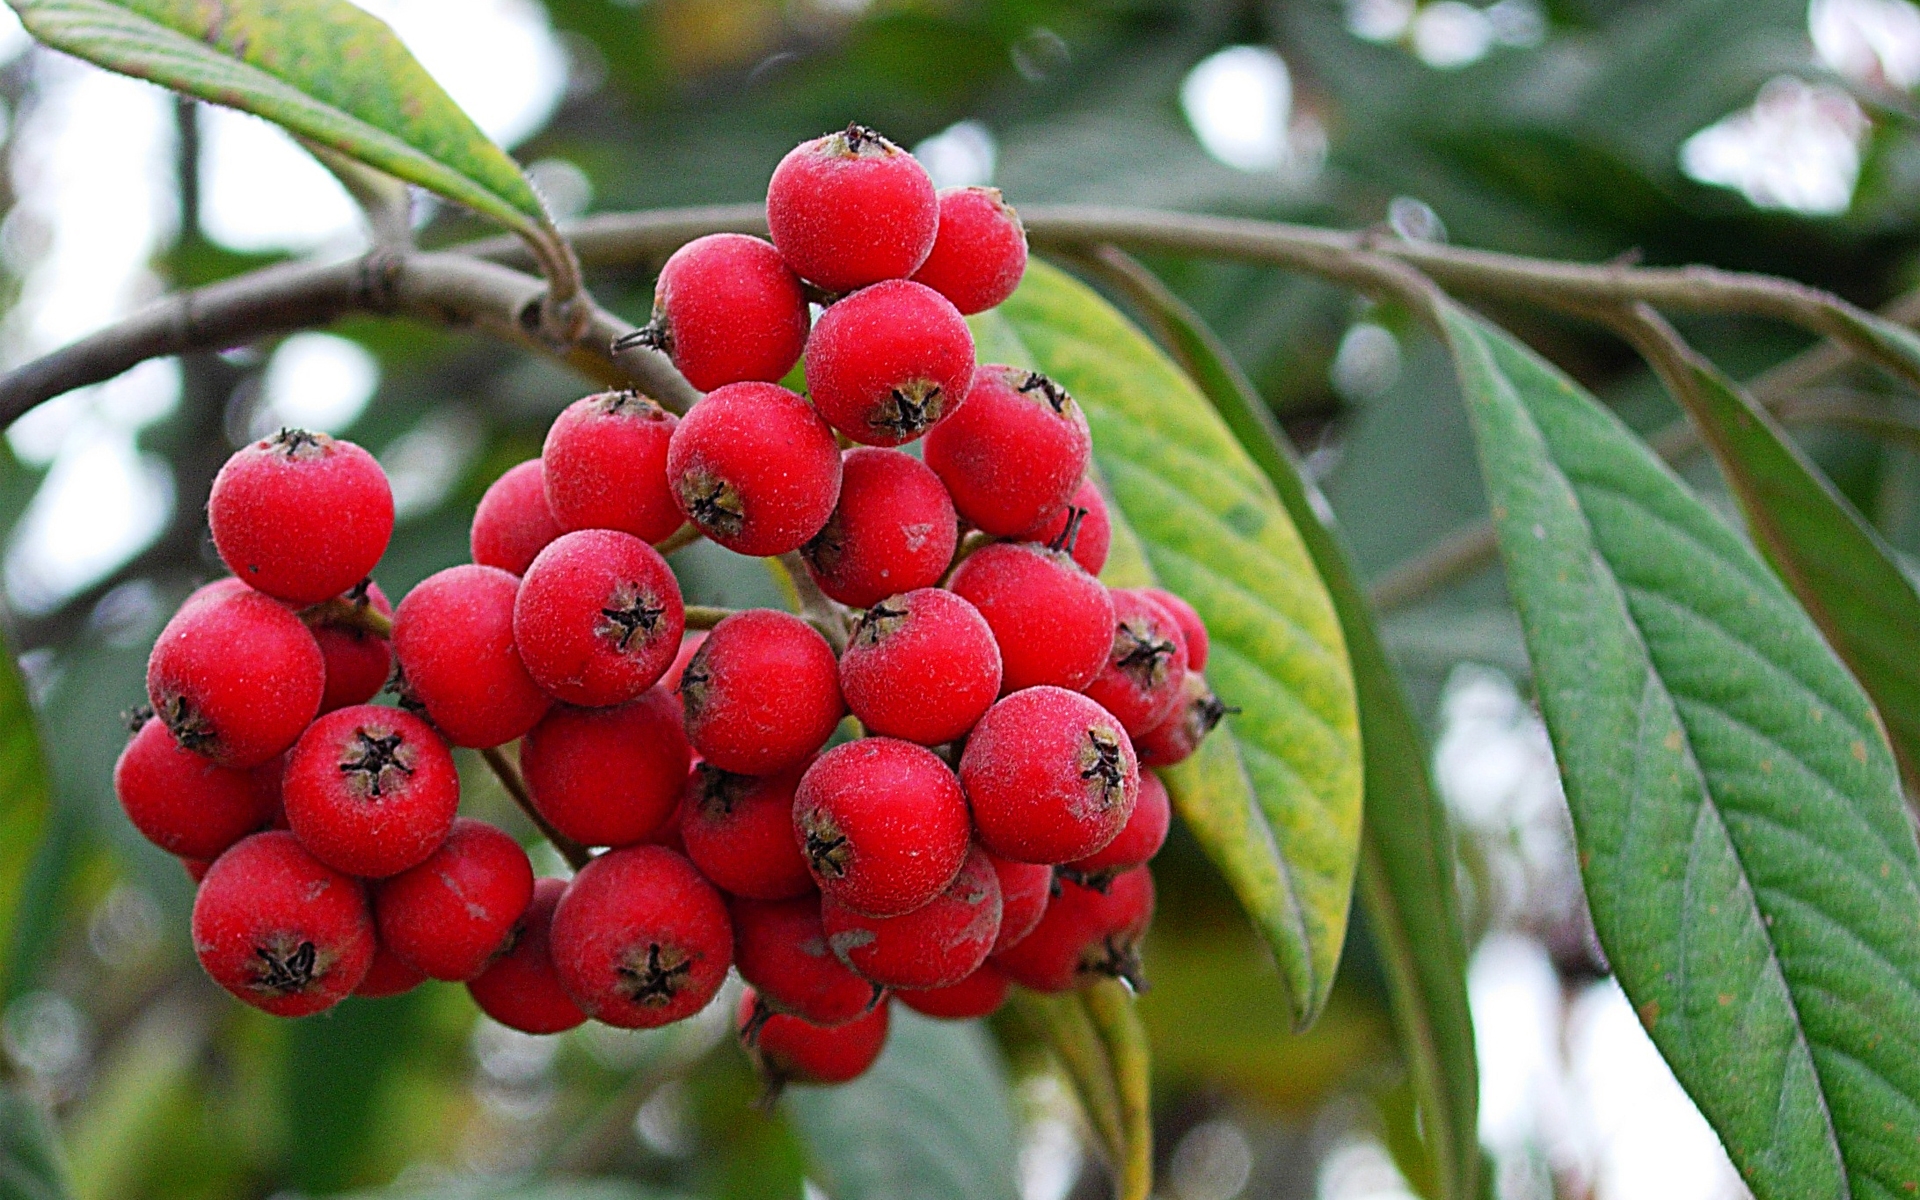 Red berries on a tree branch